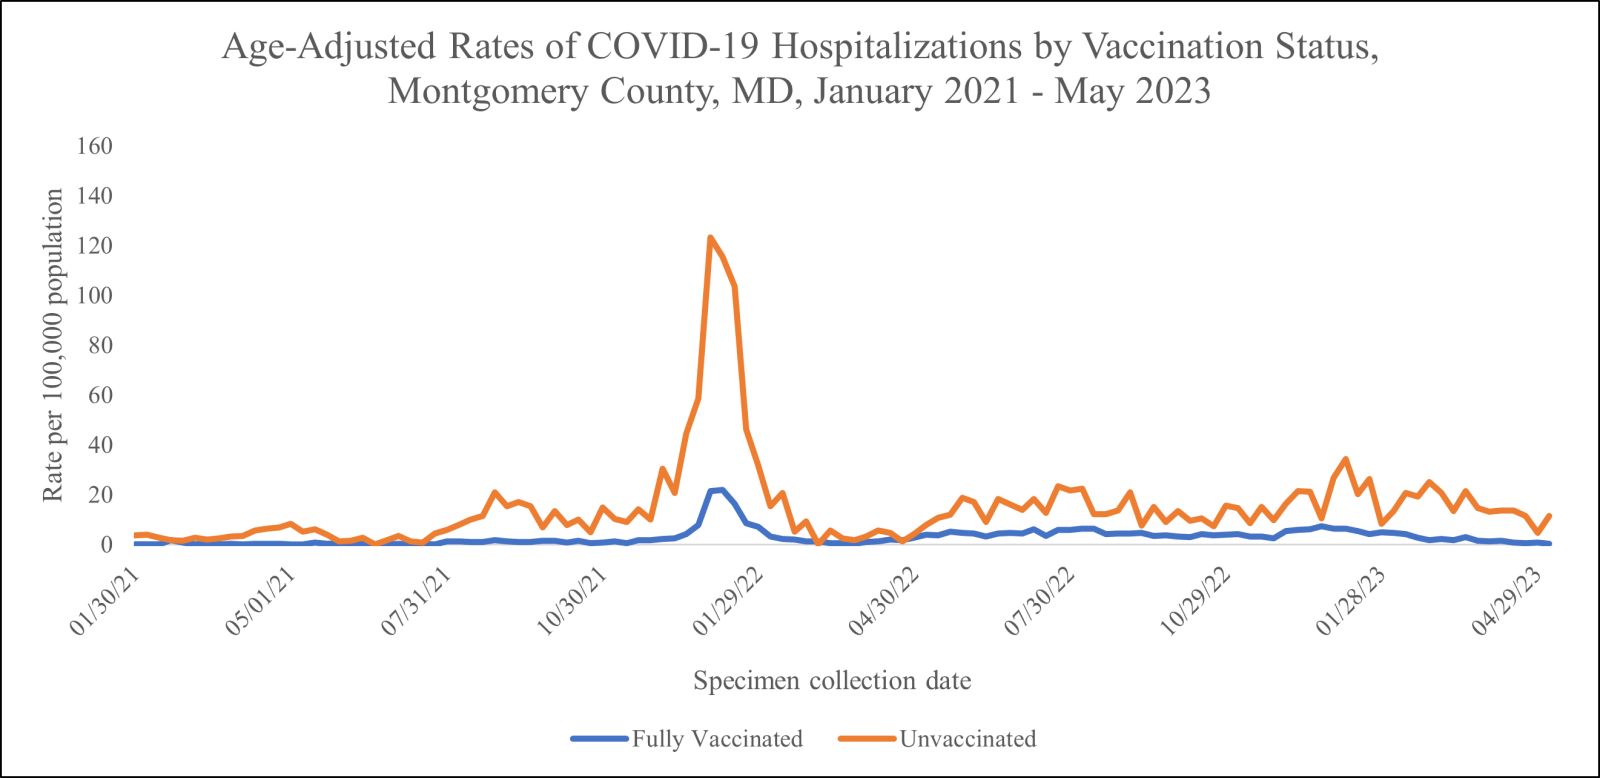 Graph: Age-Adjusted Rates of COVID-19 Hospitalizations by Vaccination Status from January 2021 to date. Download data files for more detail.